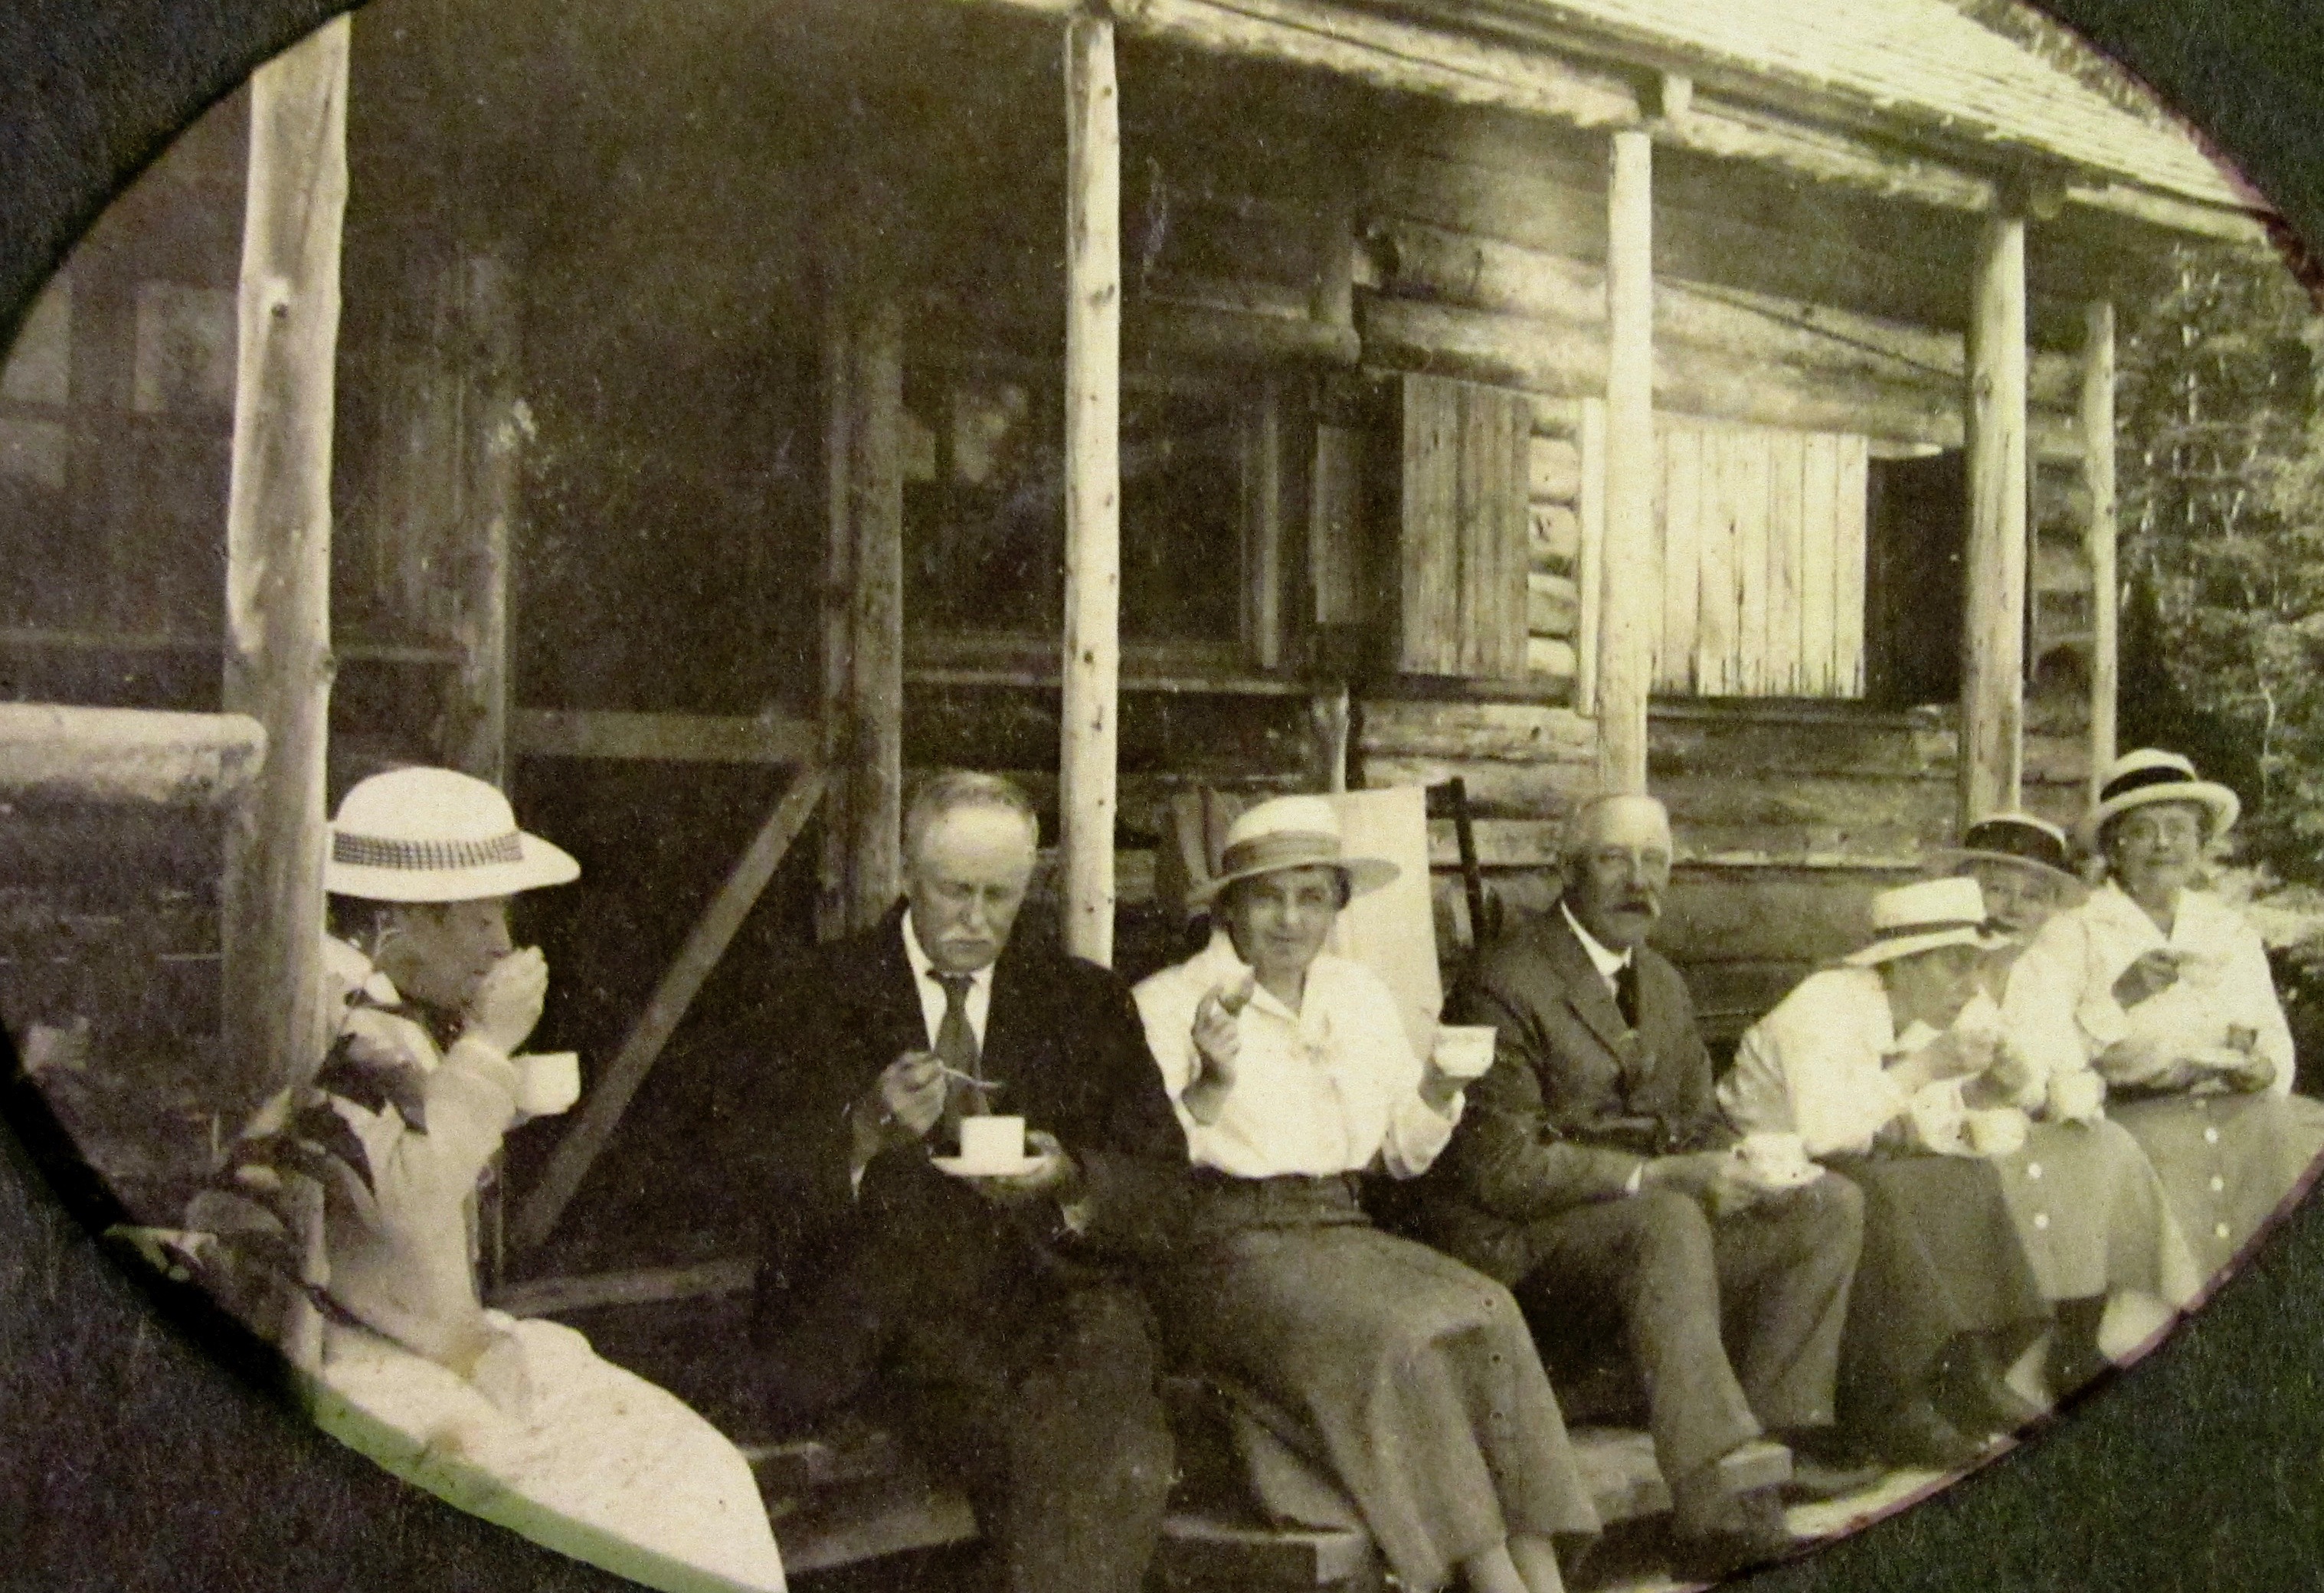 Seven middle-aged men and women drink tea on the porch of a rustic cabin.